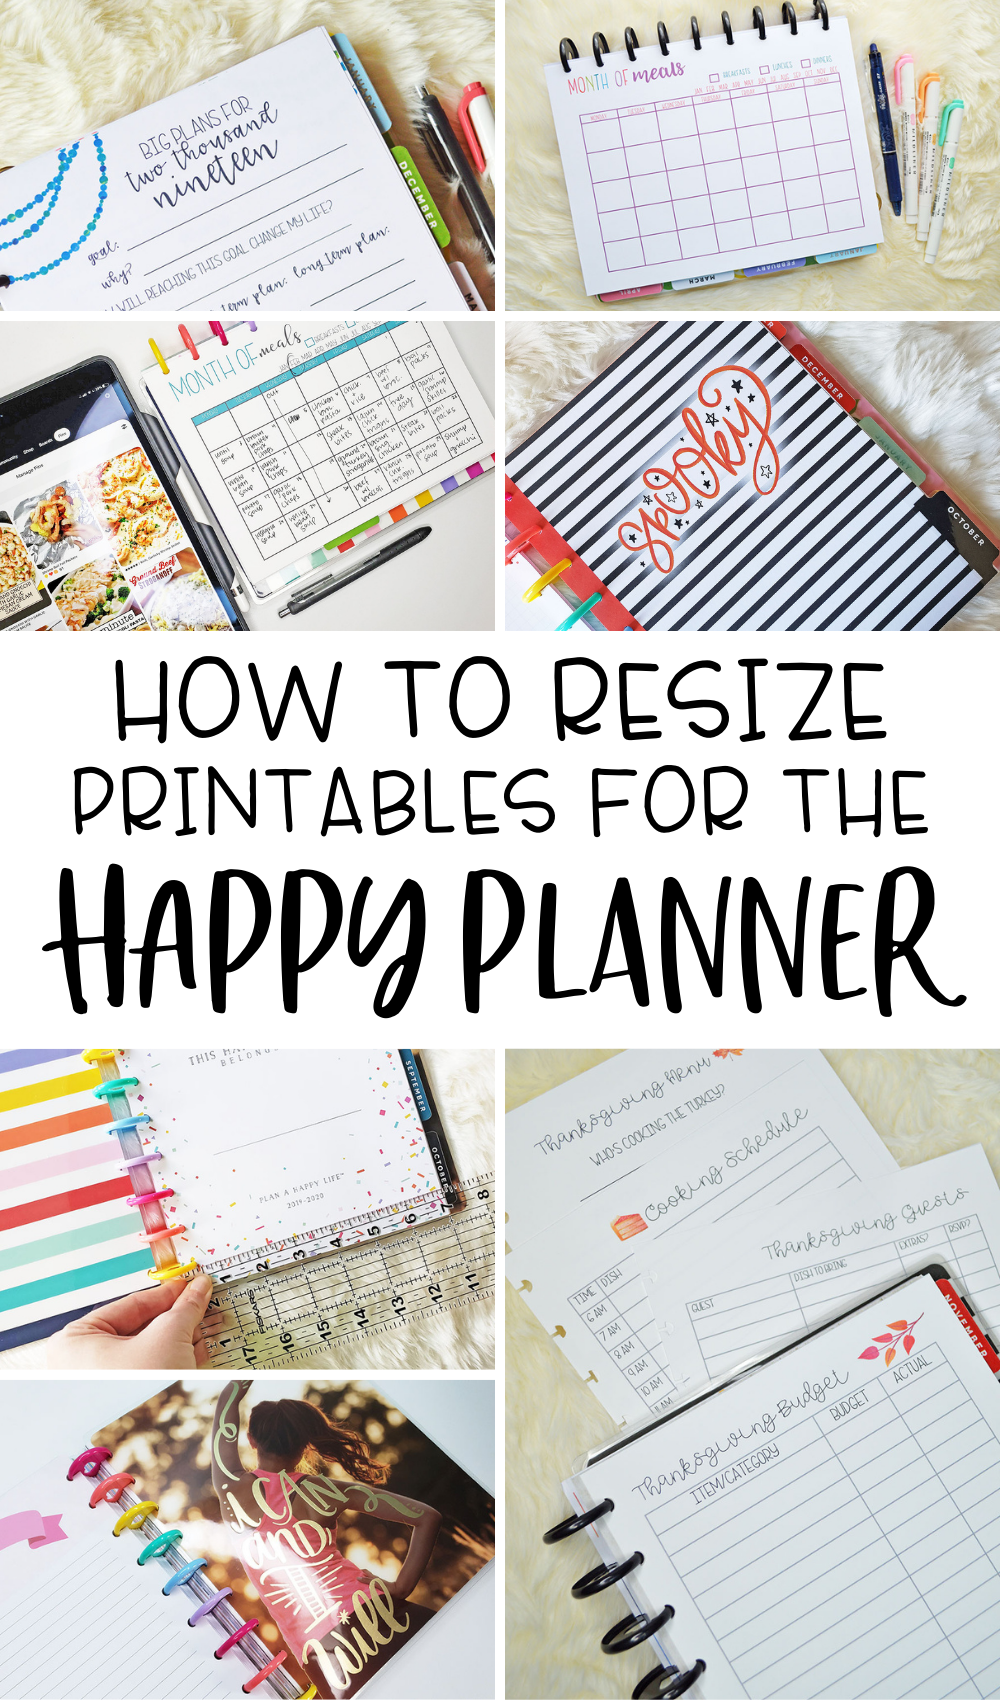 How to Resize Printables for your Happy Planner!